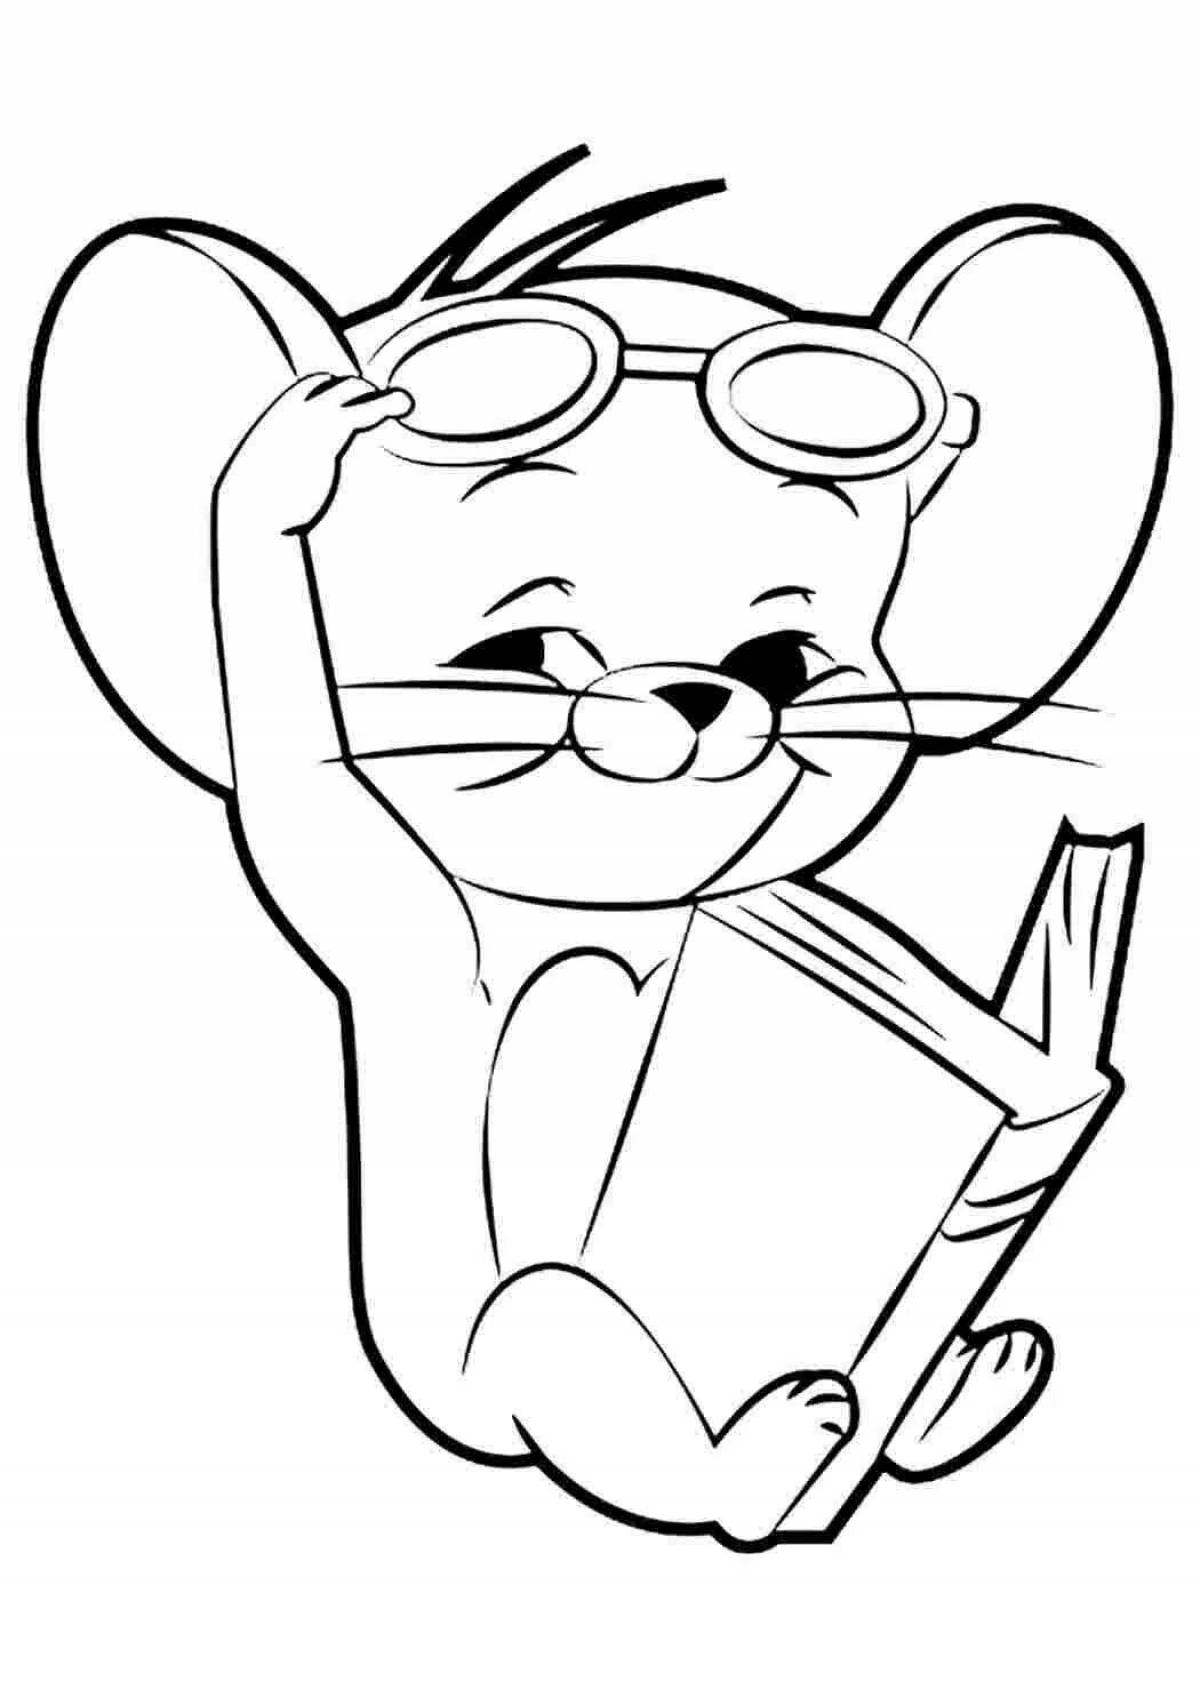 Coloring book colorful mouse with glasses